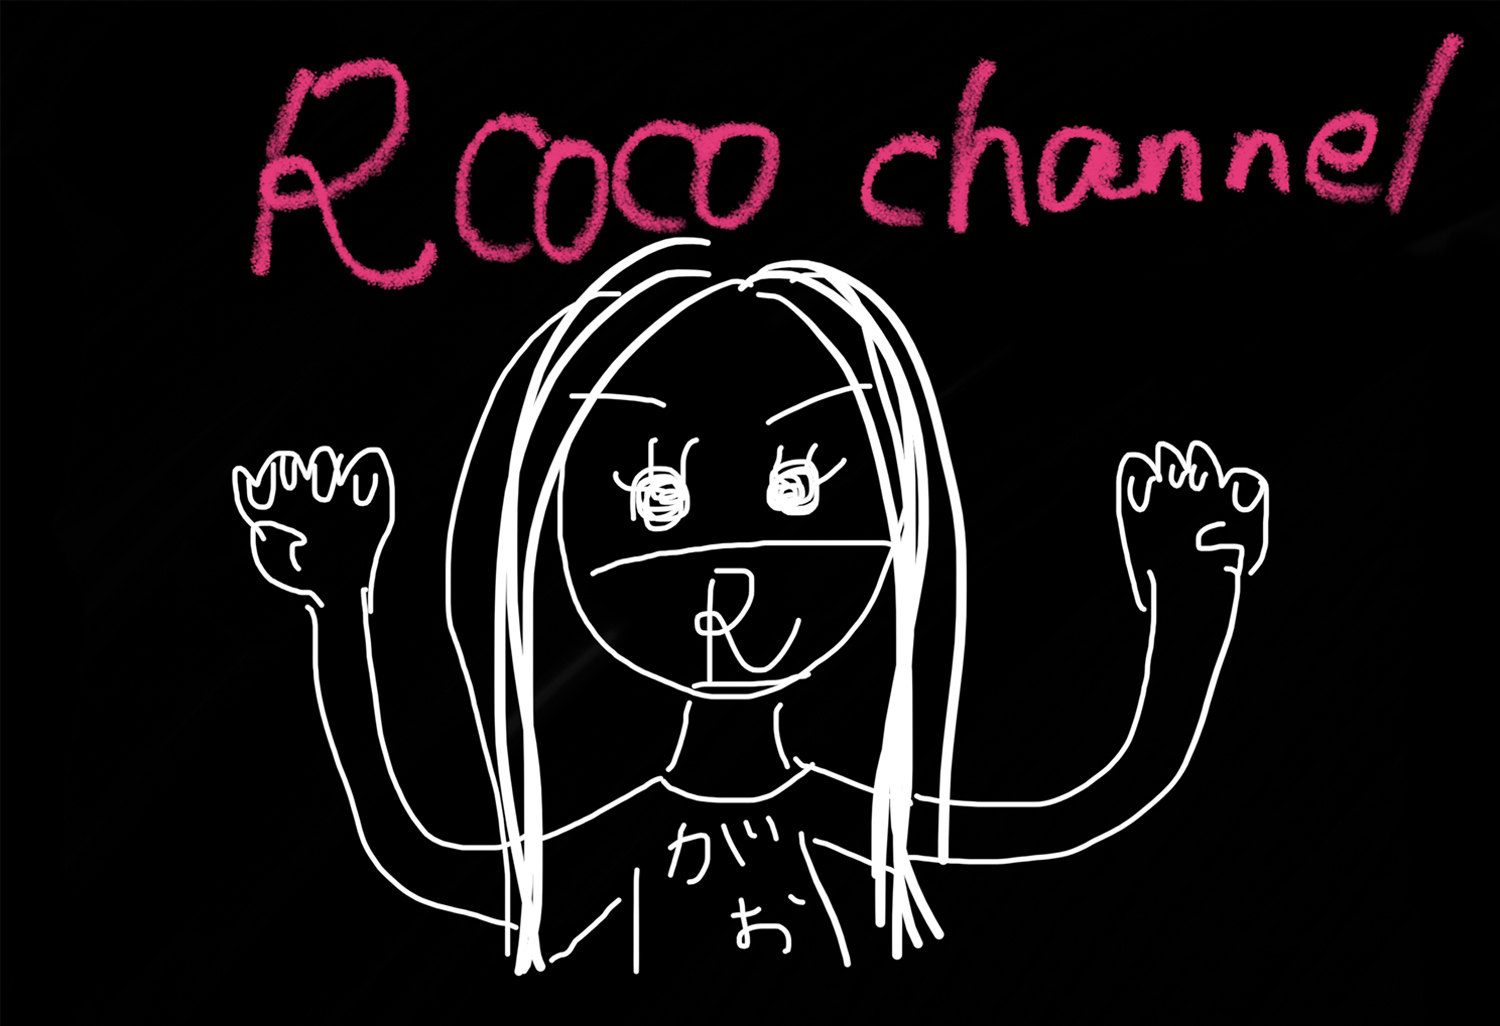 Rcoco channel